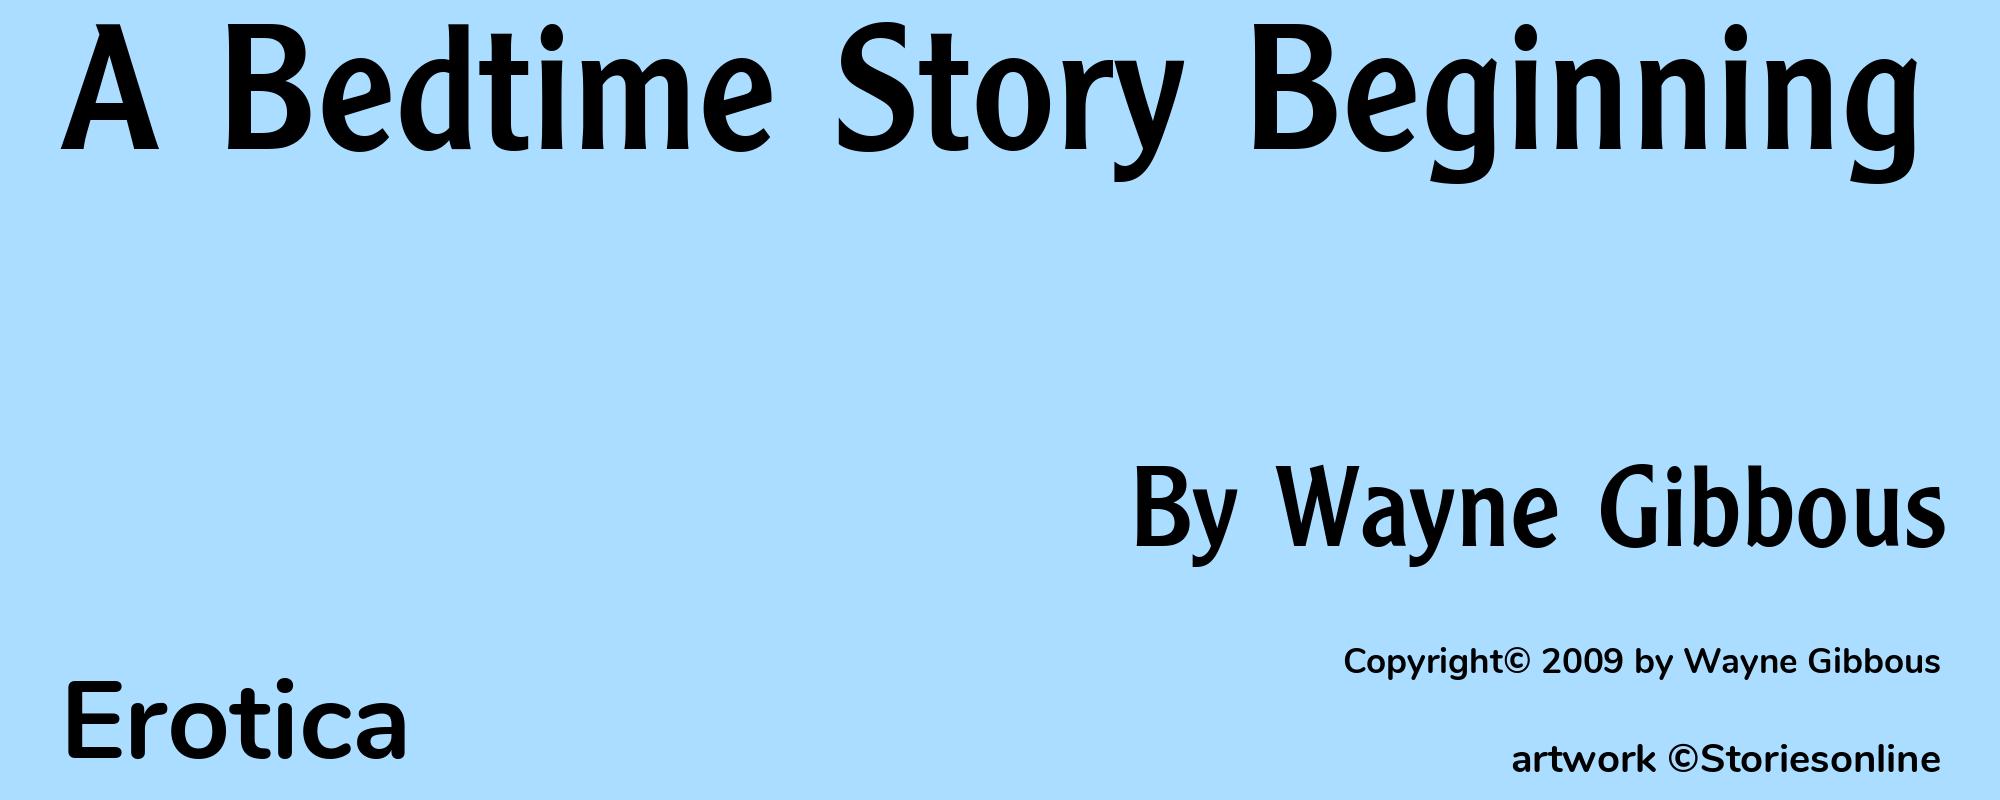 A Bedtime Story Beginning - Cover